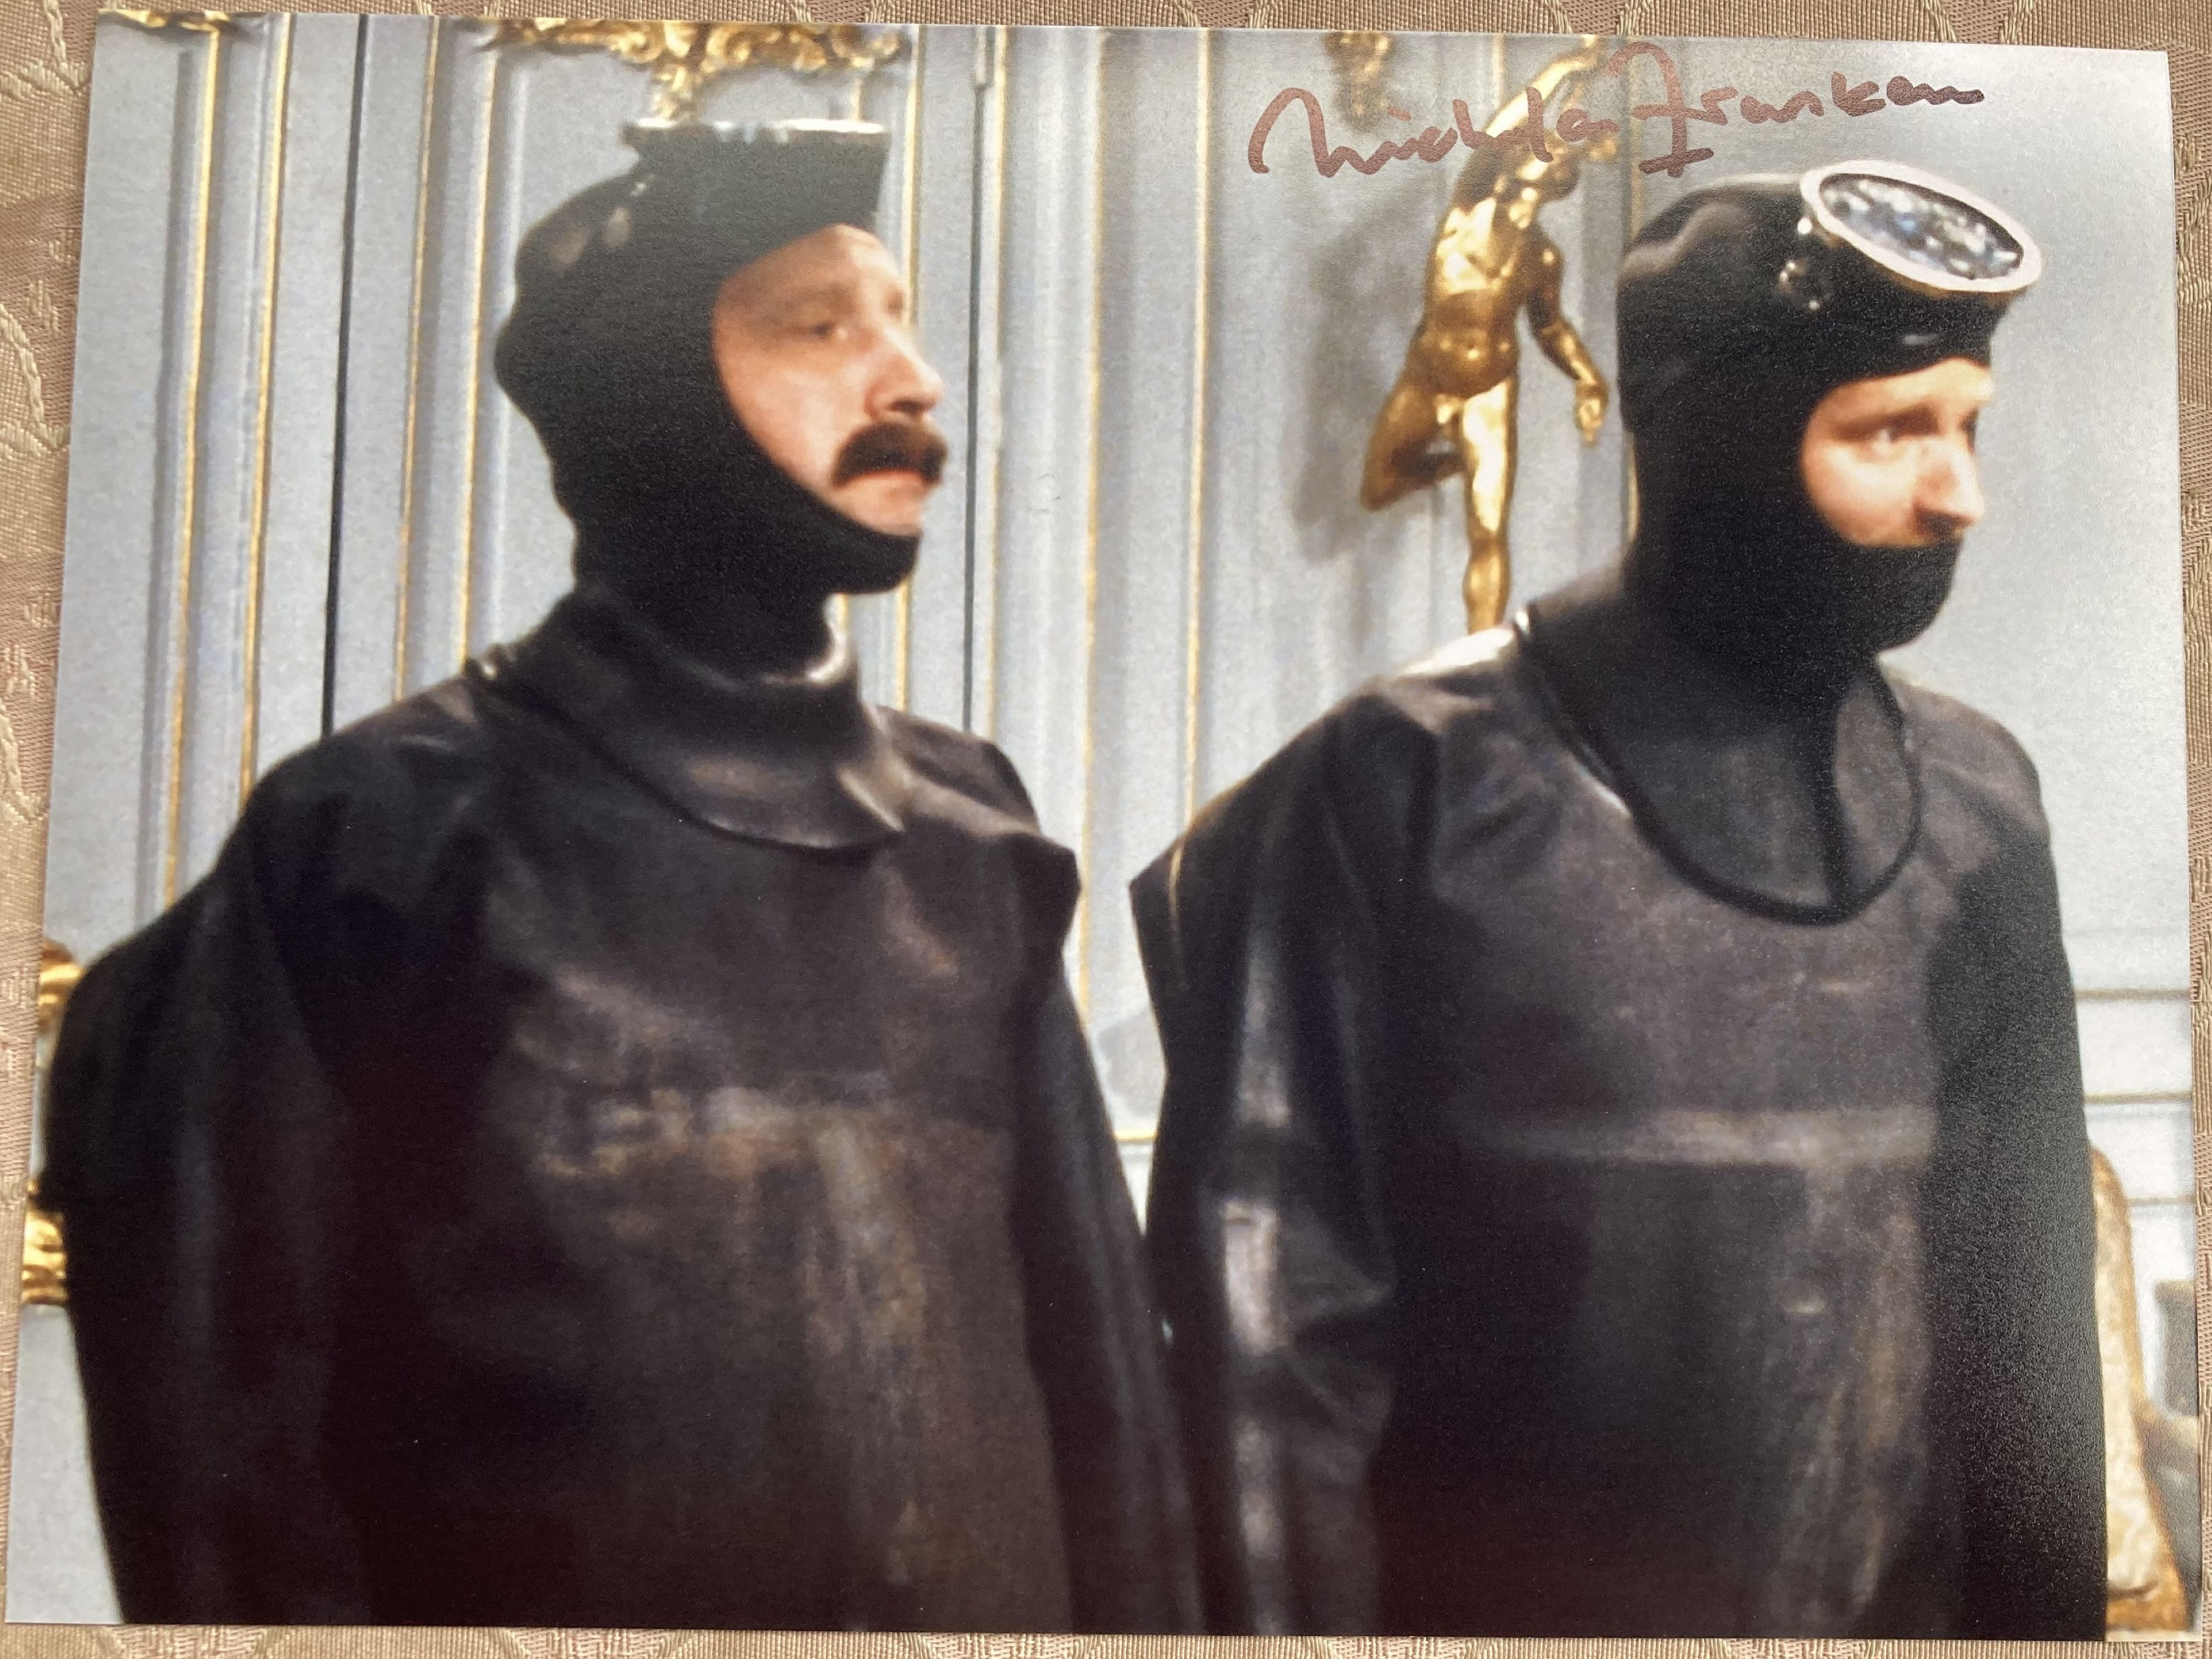 Allo Allo Nicholas Frankau as Carstairs signed 10 x 8 colour photo in Wet suit. He is an actor,